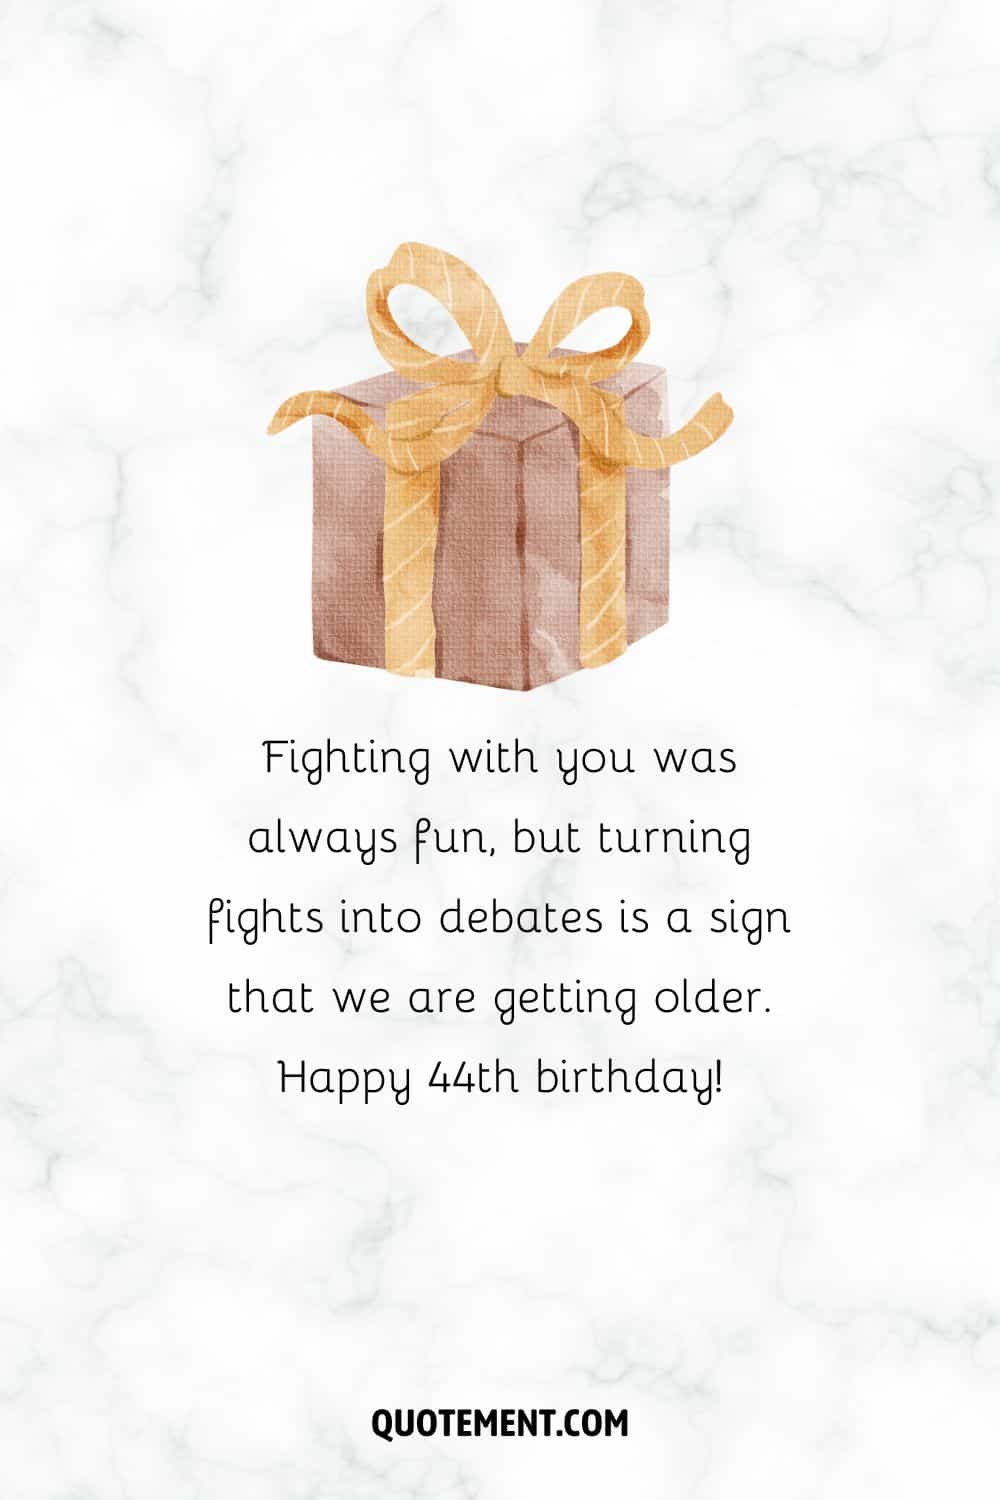 Fighting with you was always fun, but turning fights into debates is a sign that we are getting older.